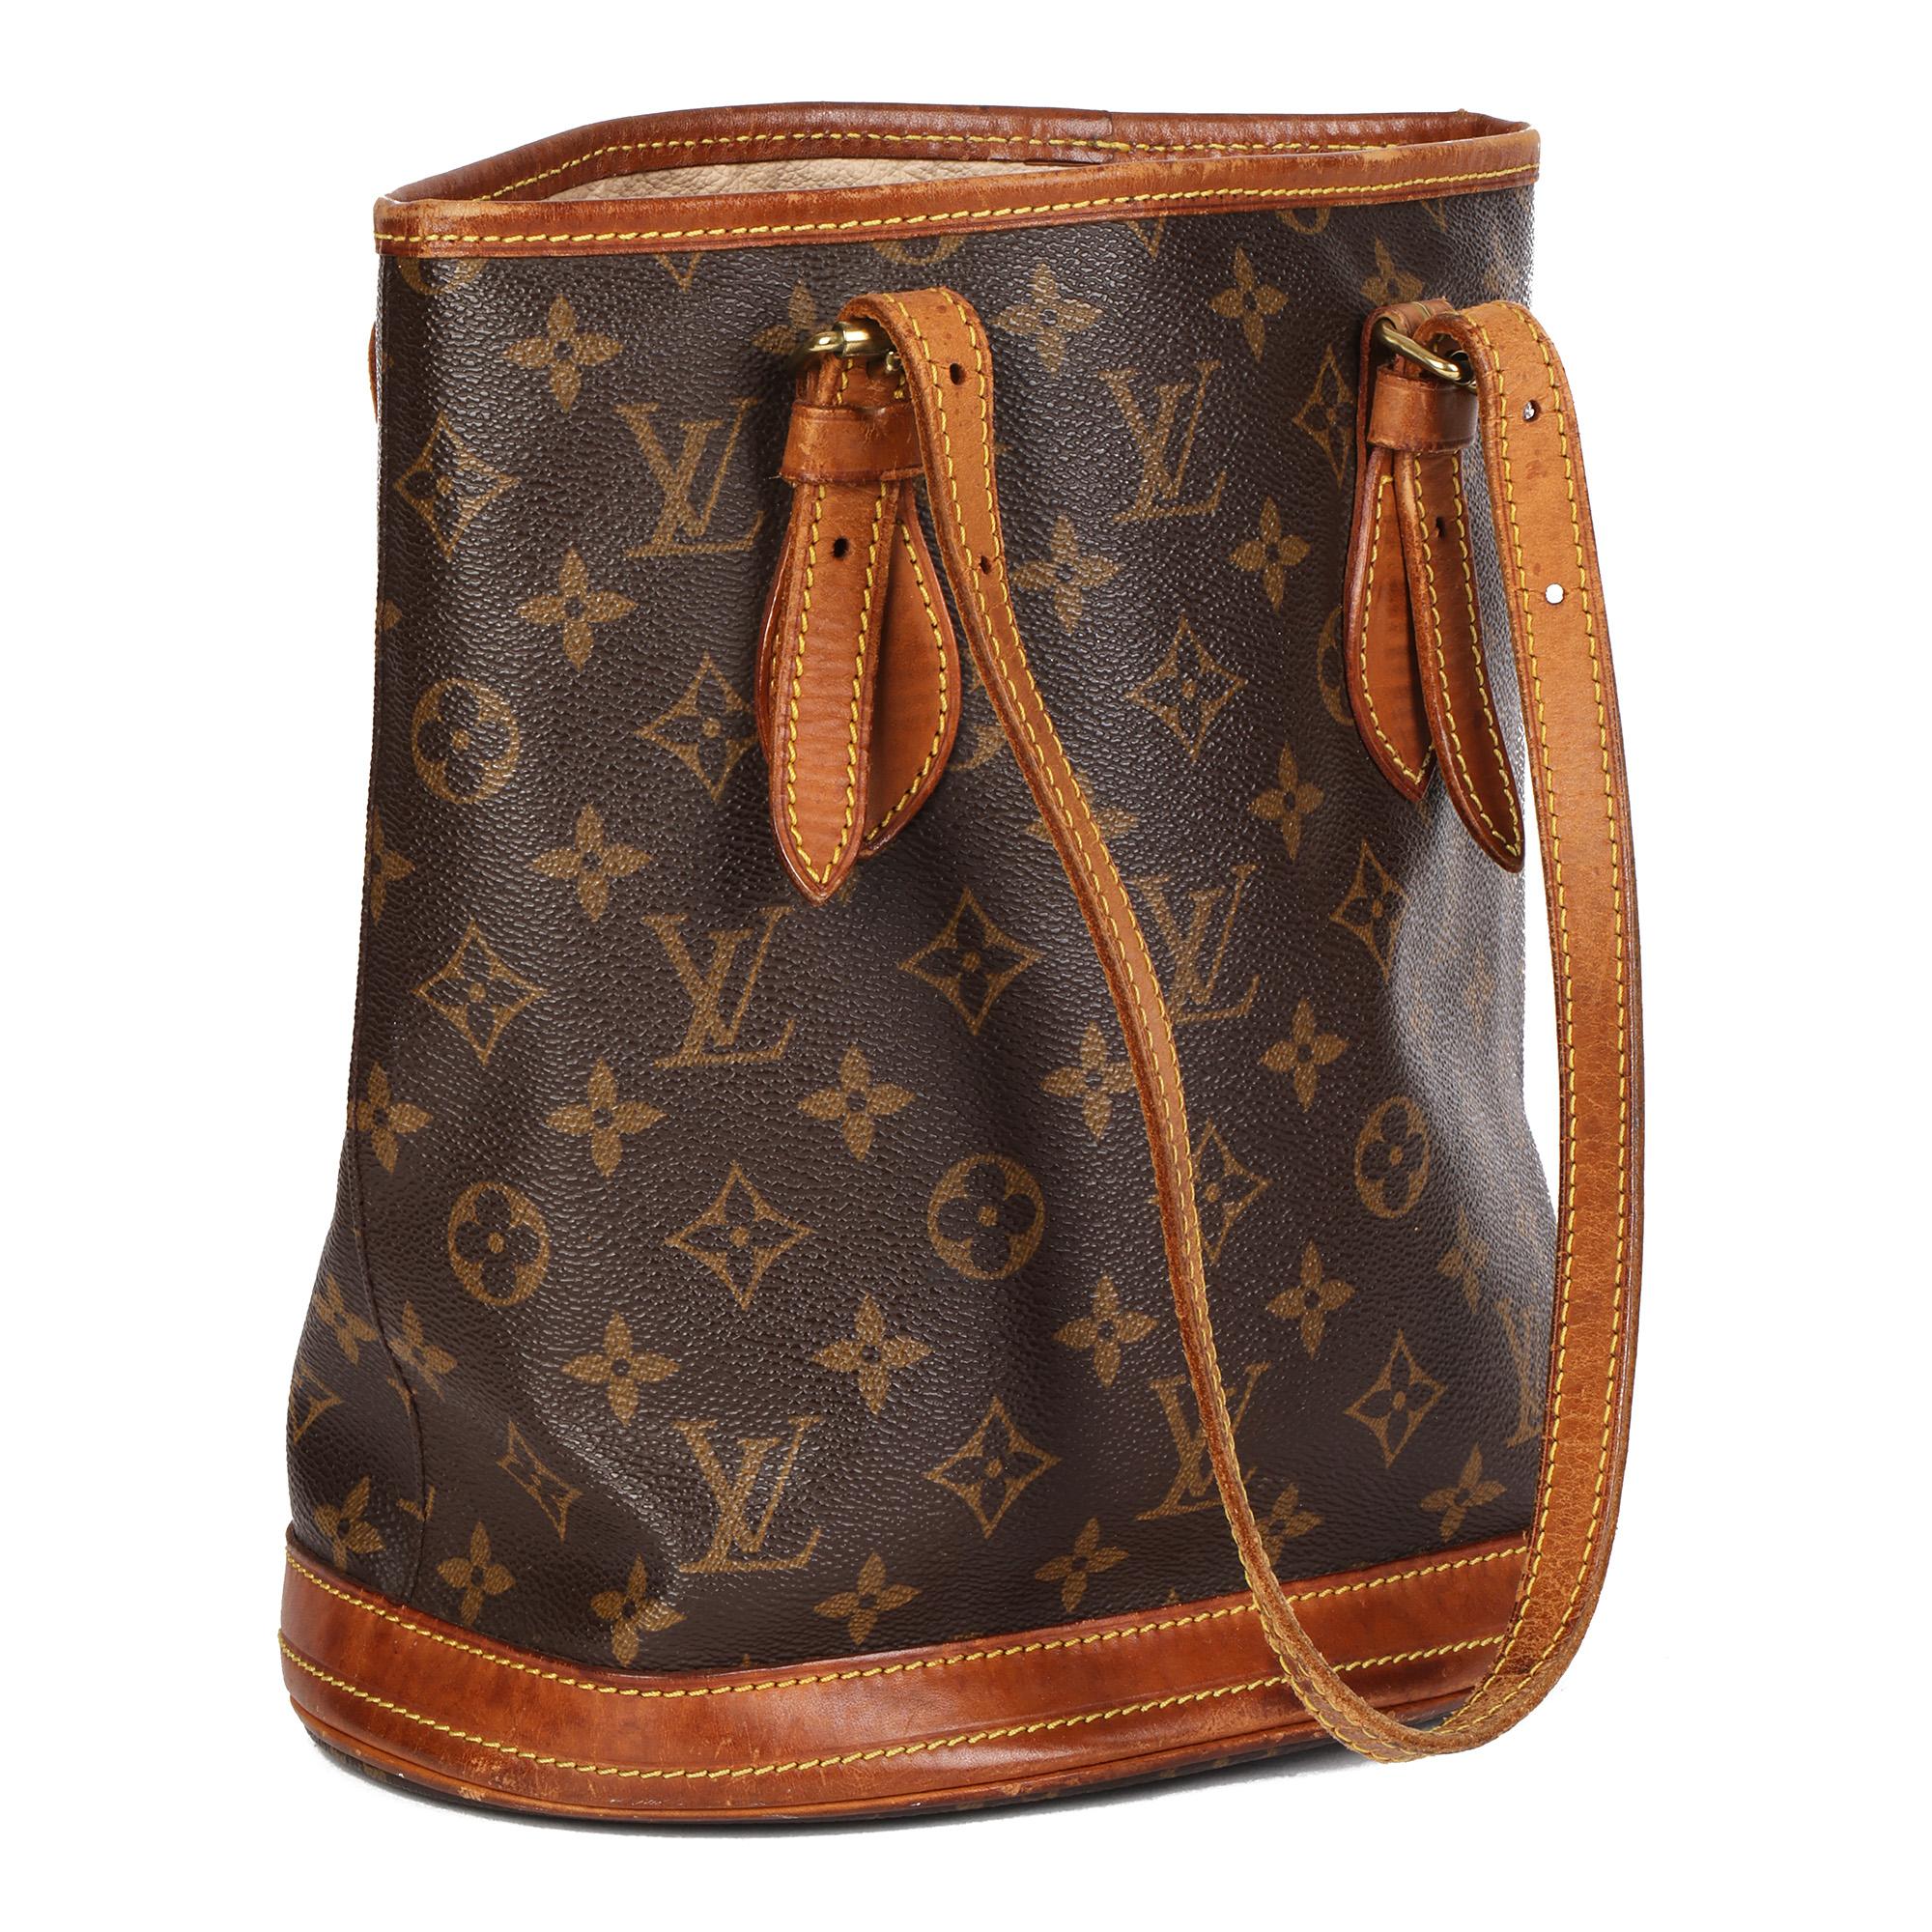 LOUIS VUITTON
Brown Monogram Coated Canvas & Vachetta Leather Vintage Bucket Bag PM with Pouch

Xupes Reference: CB653
Serial Number: AR0062
Age (Circa): 2002
Accompanied By: Louis Vuitton Dust Bag, Interior Pouch
Authenticity Details: Date Stamp